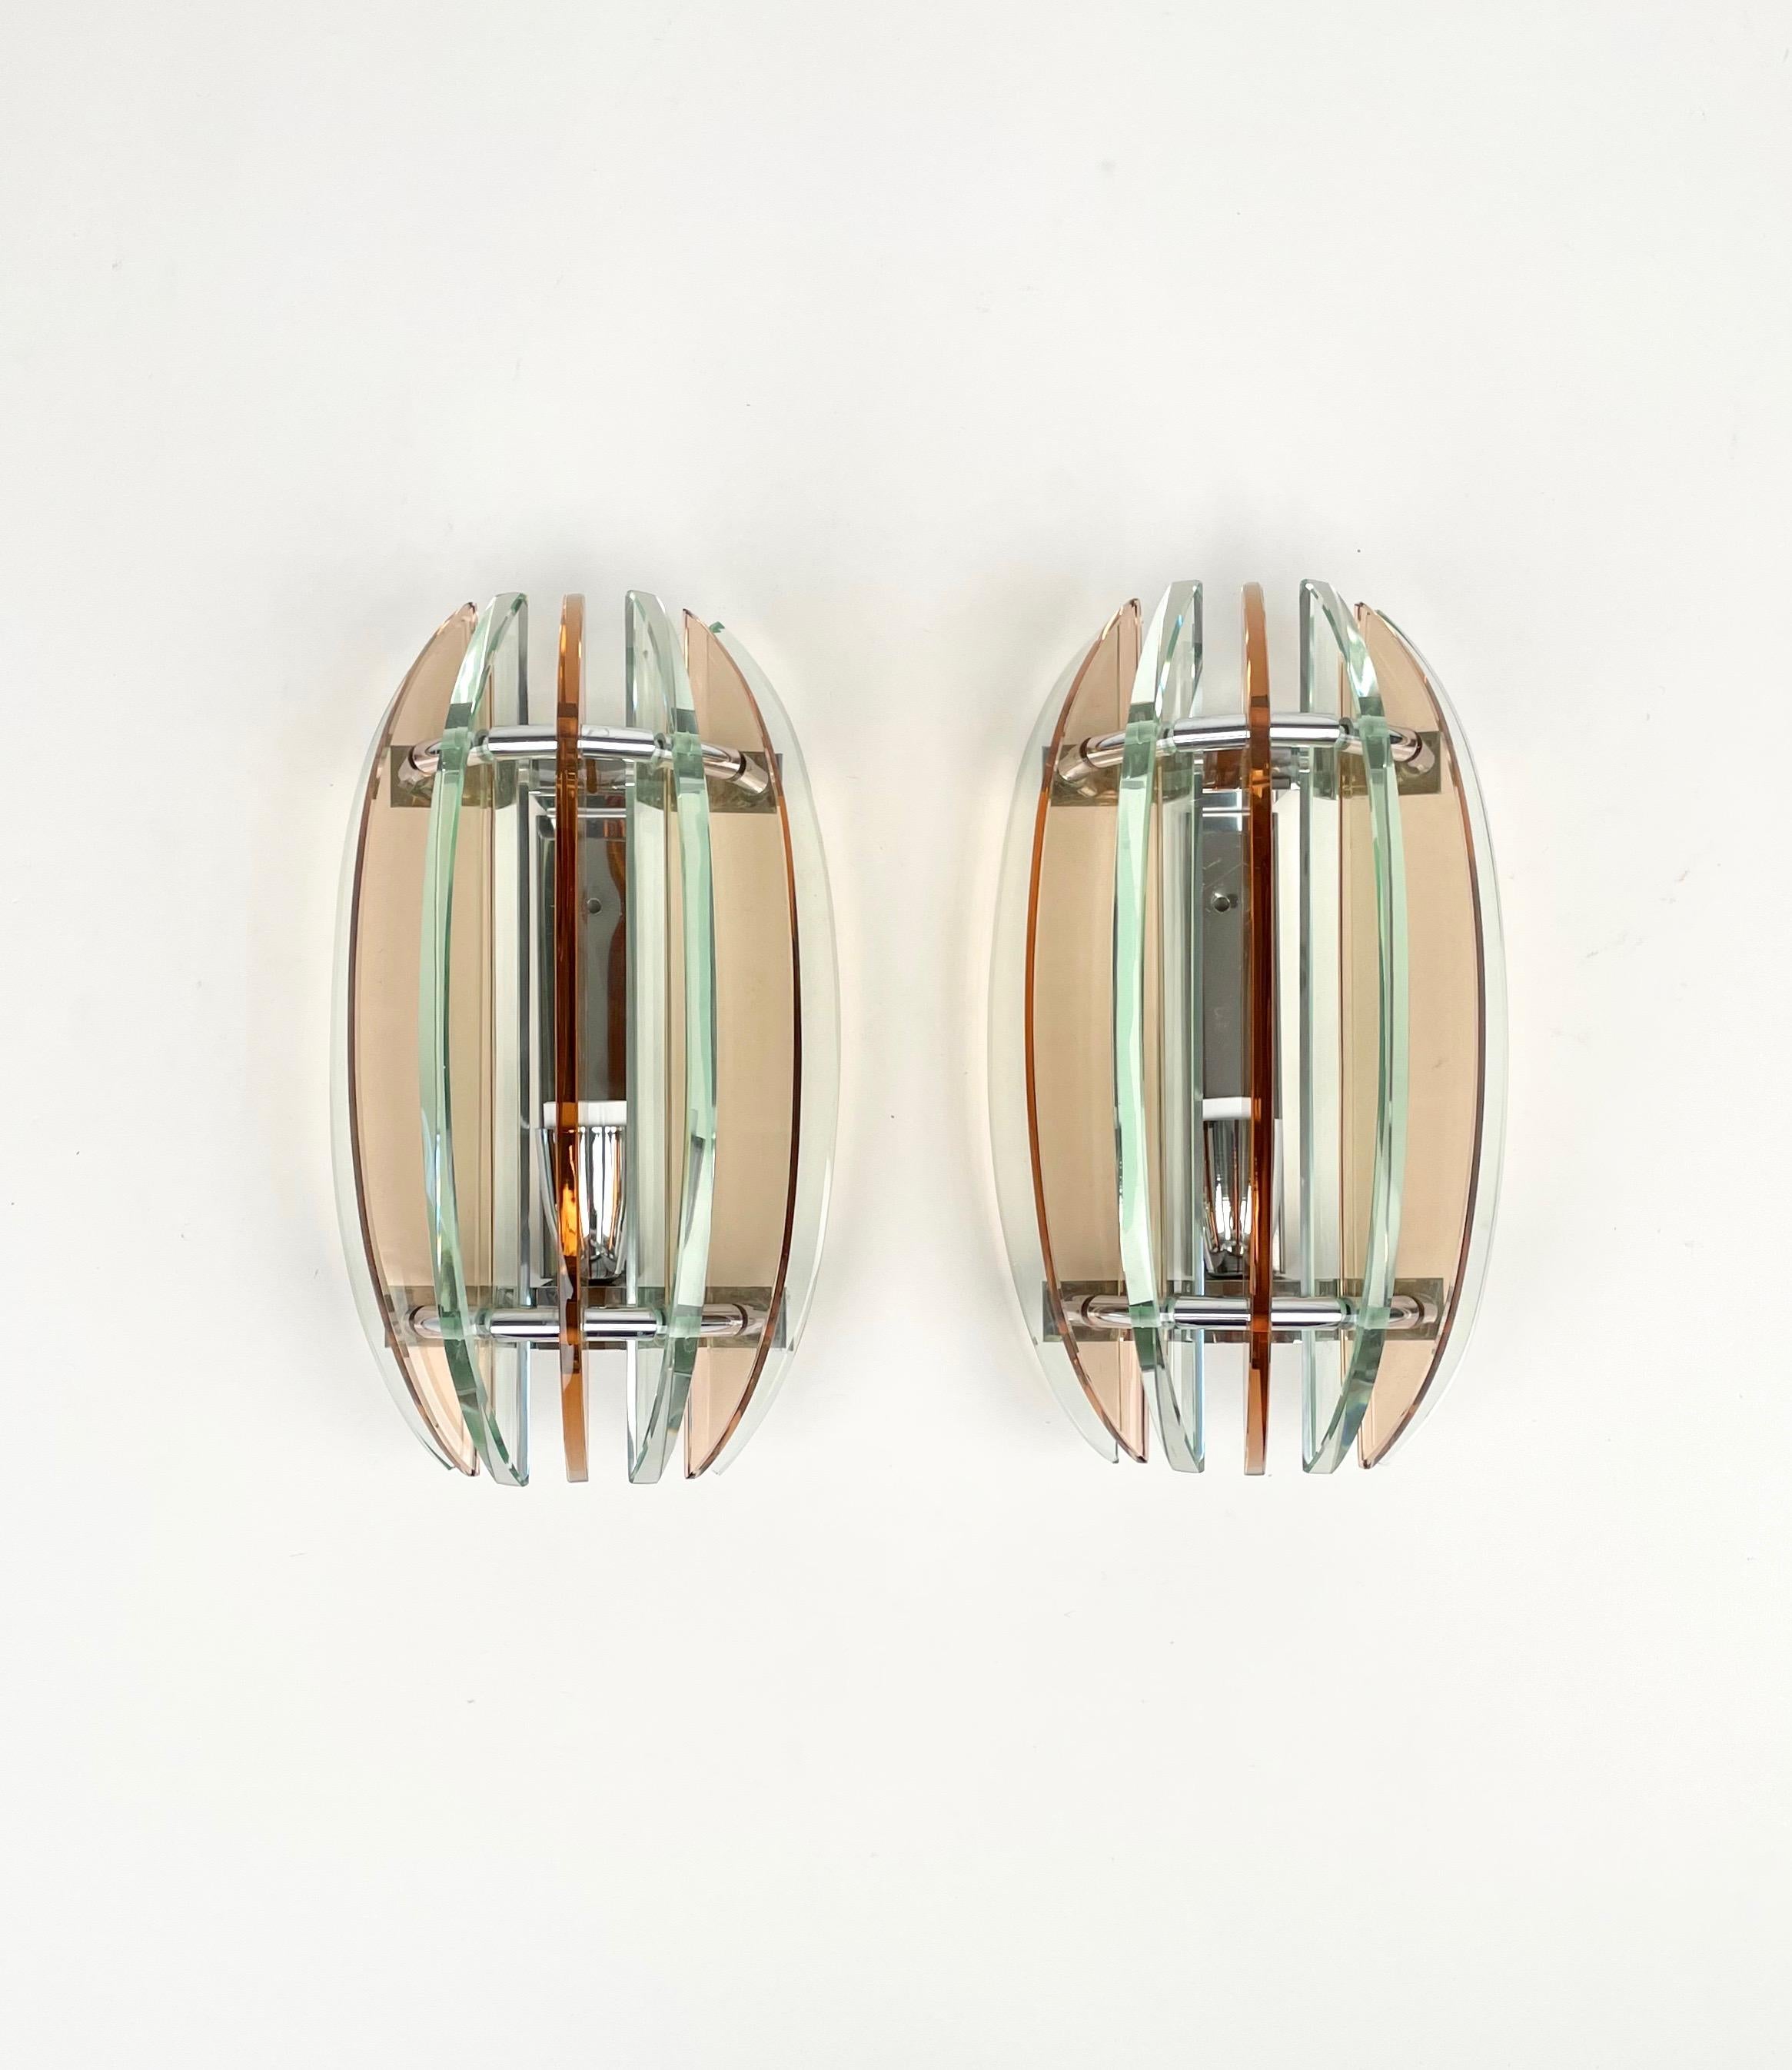 Pair of wall sconces in colored glass (pink and green) and chrome by Veca, Italy, 1970s.